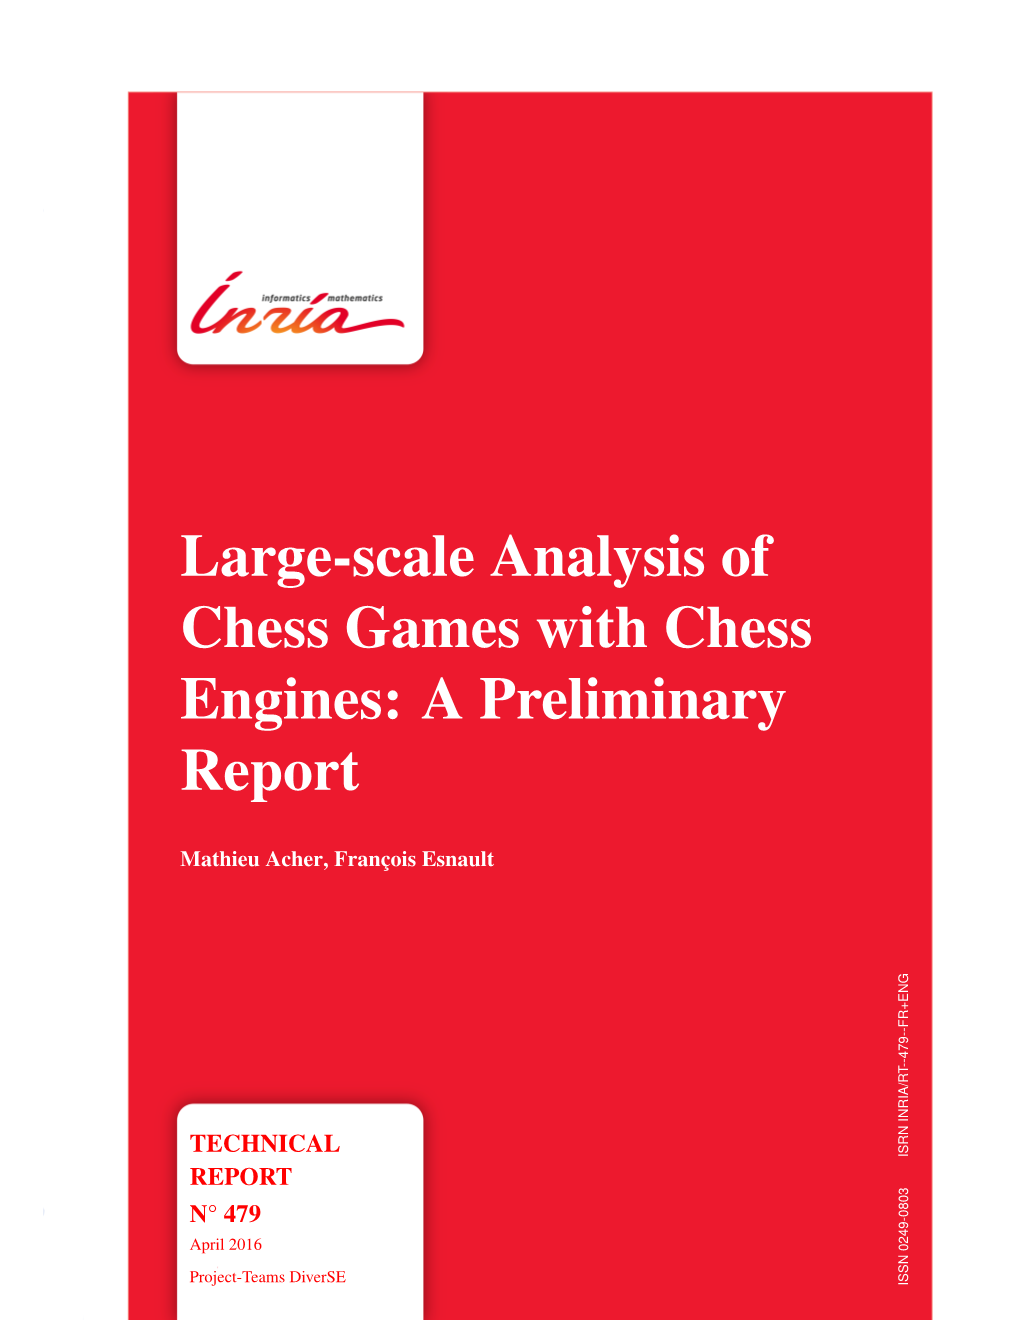 Large-Scale Analysis of Chess Games with Chess Engines: a Preliminary Report